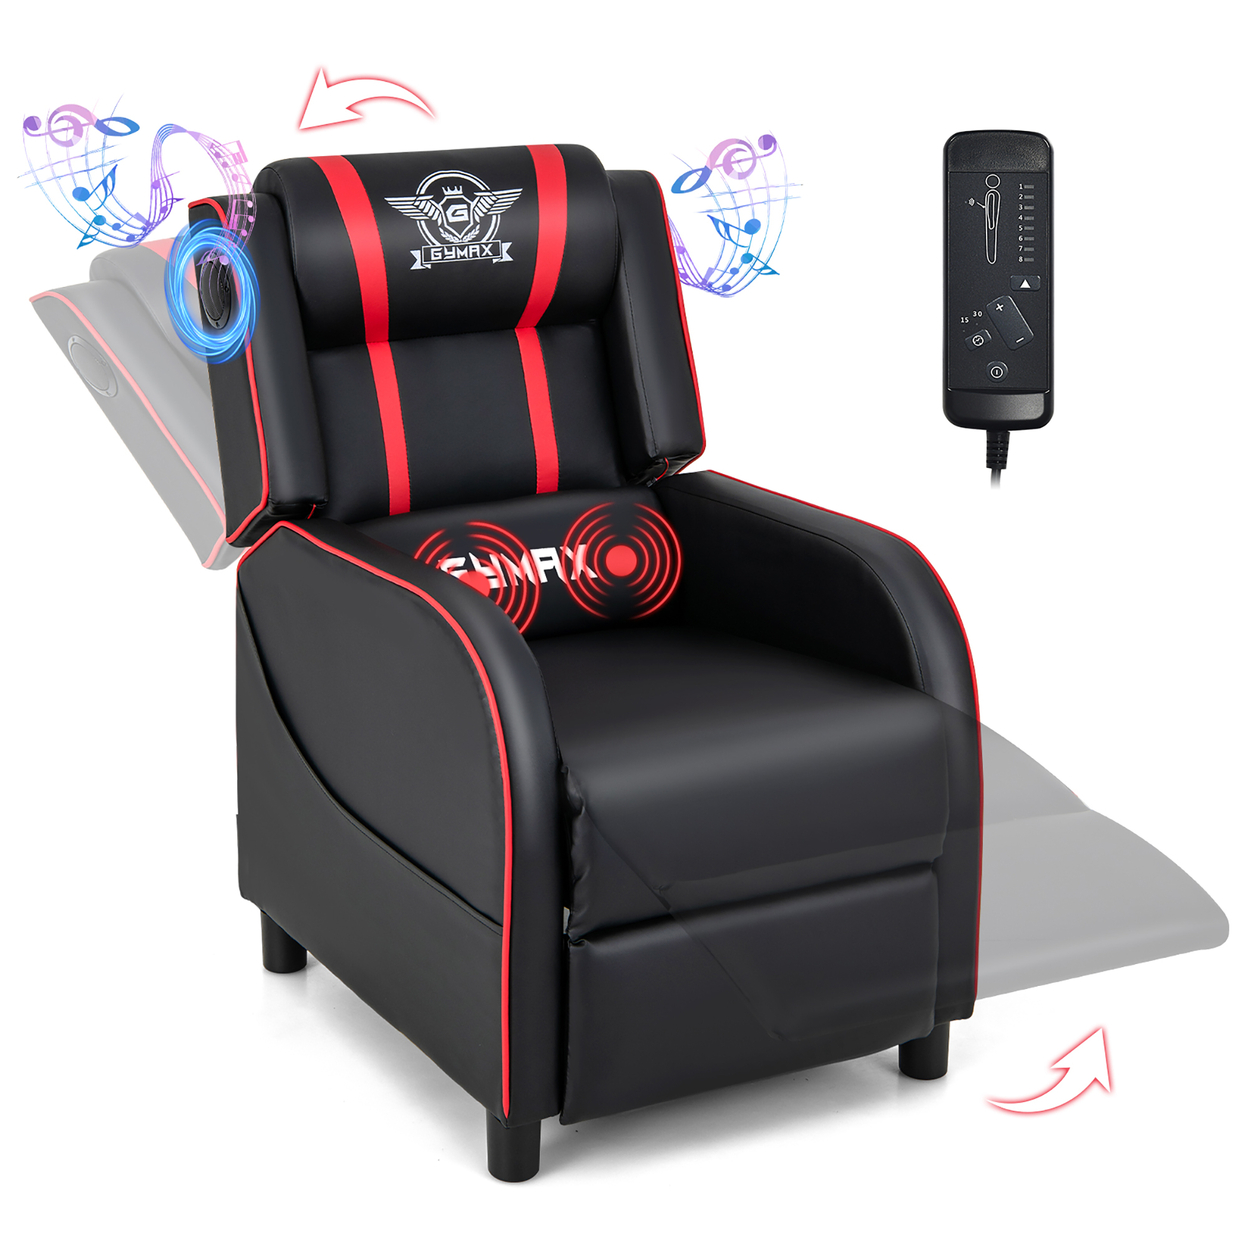 Massage Gaming Recliner Chair PU Leather Single Recliner Sofa Chair - Red, Black